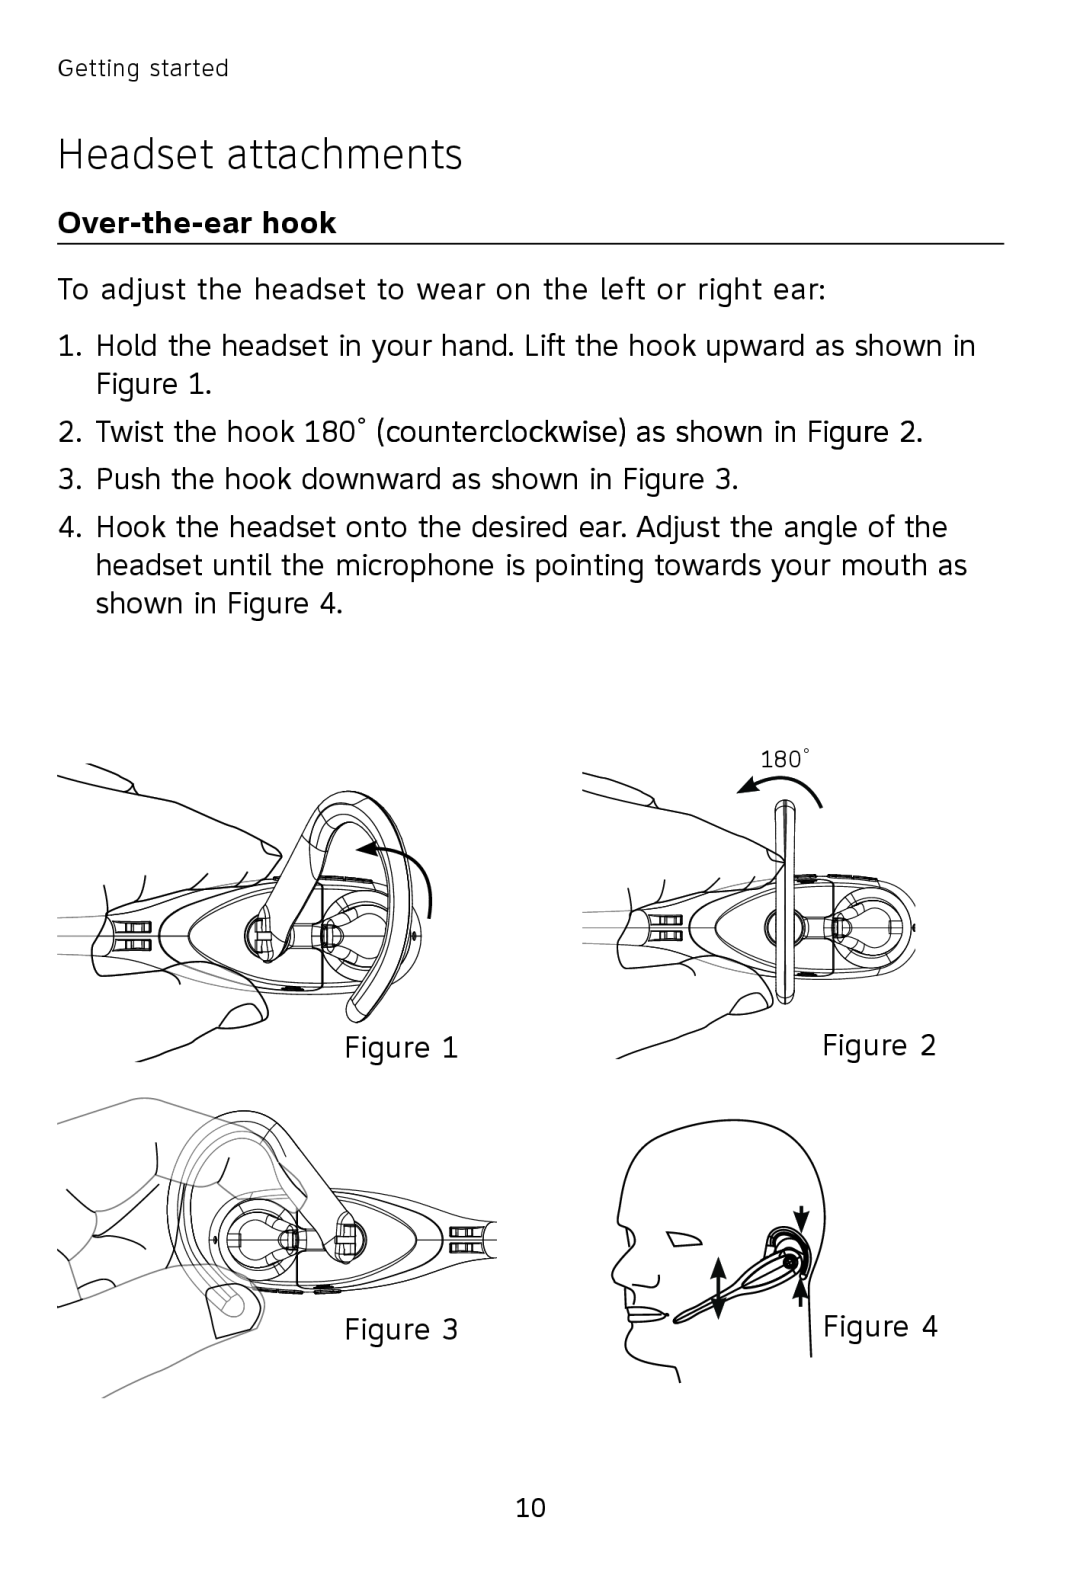 AT&T TL7600 user manual Headset attachments, Push the hook downward as shown in Figure 